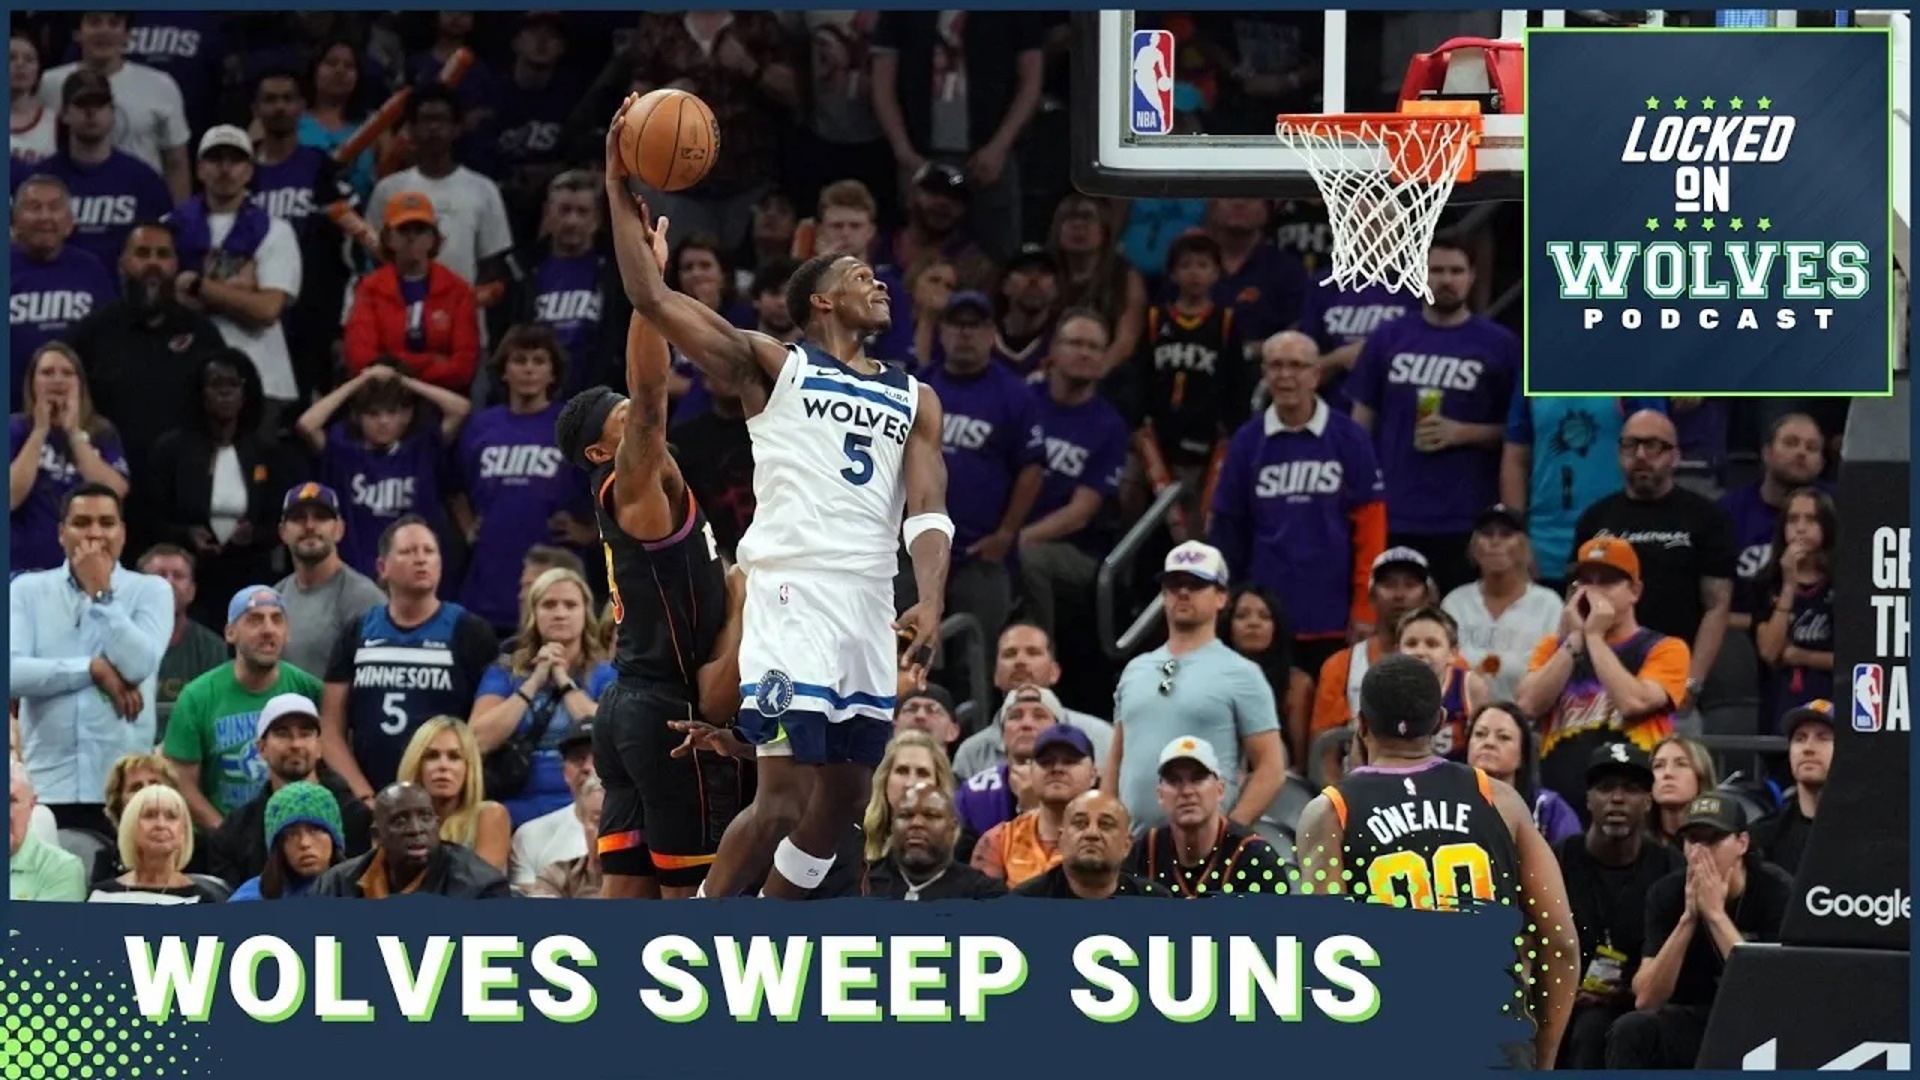 Anthony Edwards scored 4-0 points and Karl-Anthony Towns turned in a double-double as the Minnesota Timberwolves beat the Phoenix Suns to complete a sweep.